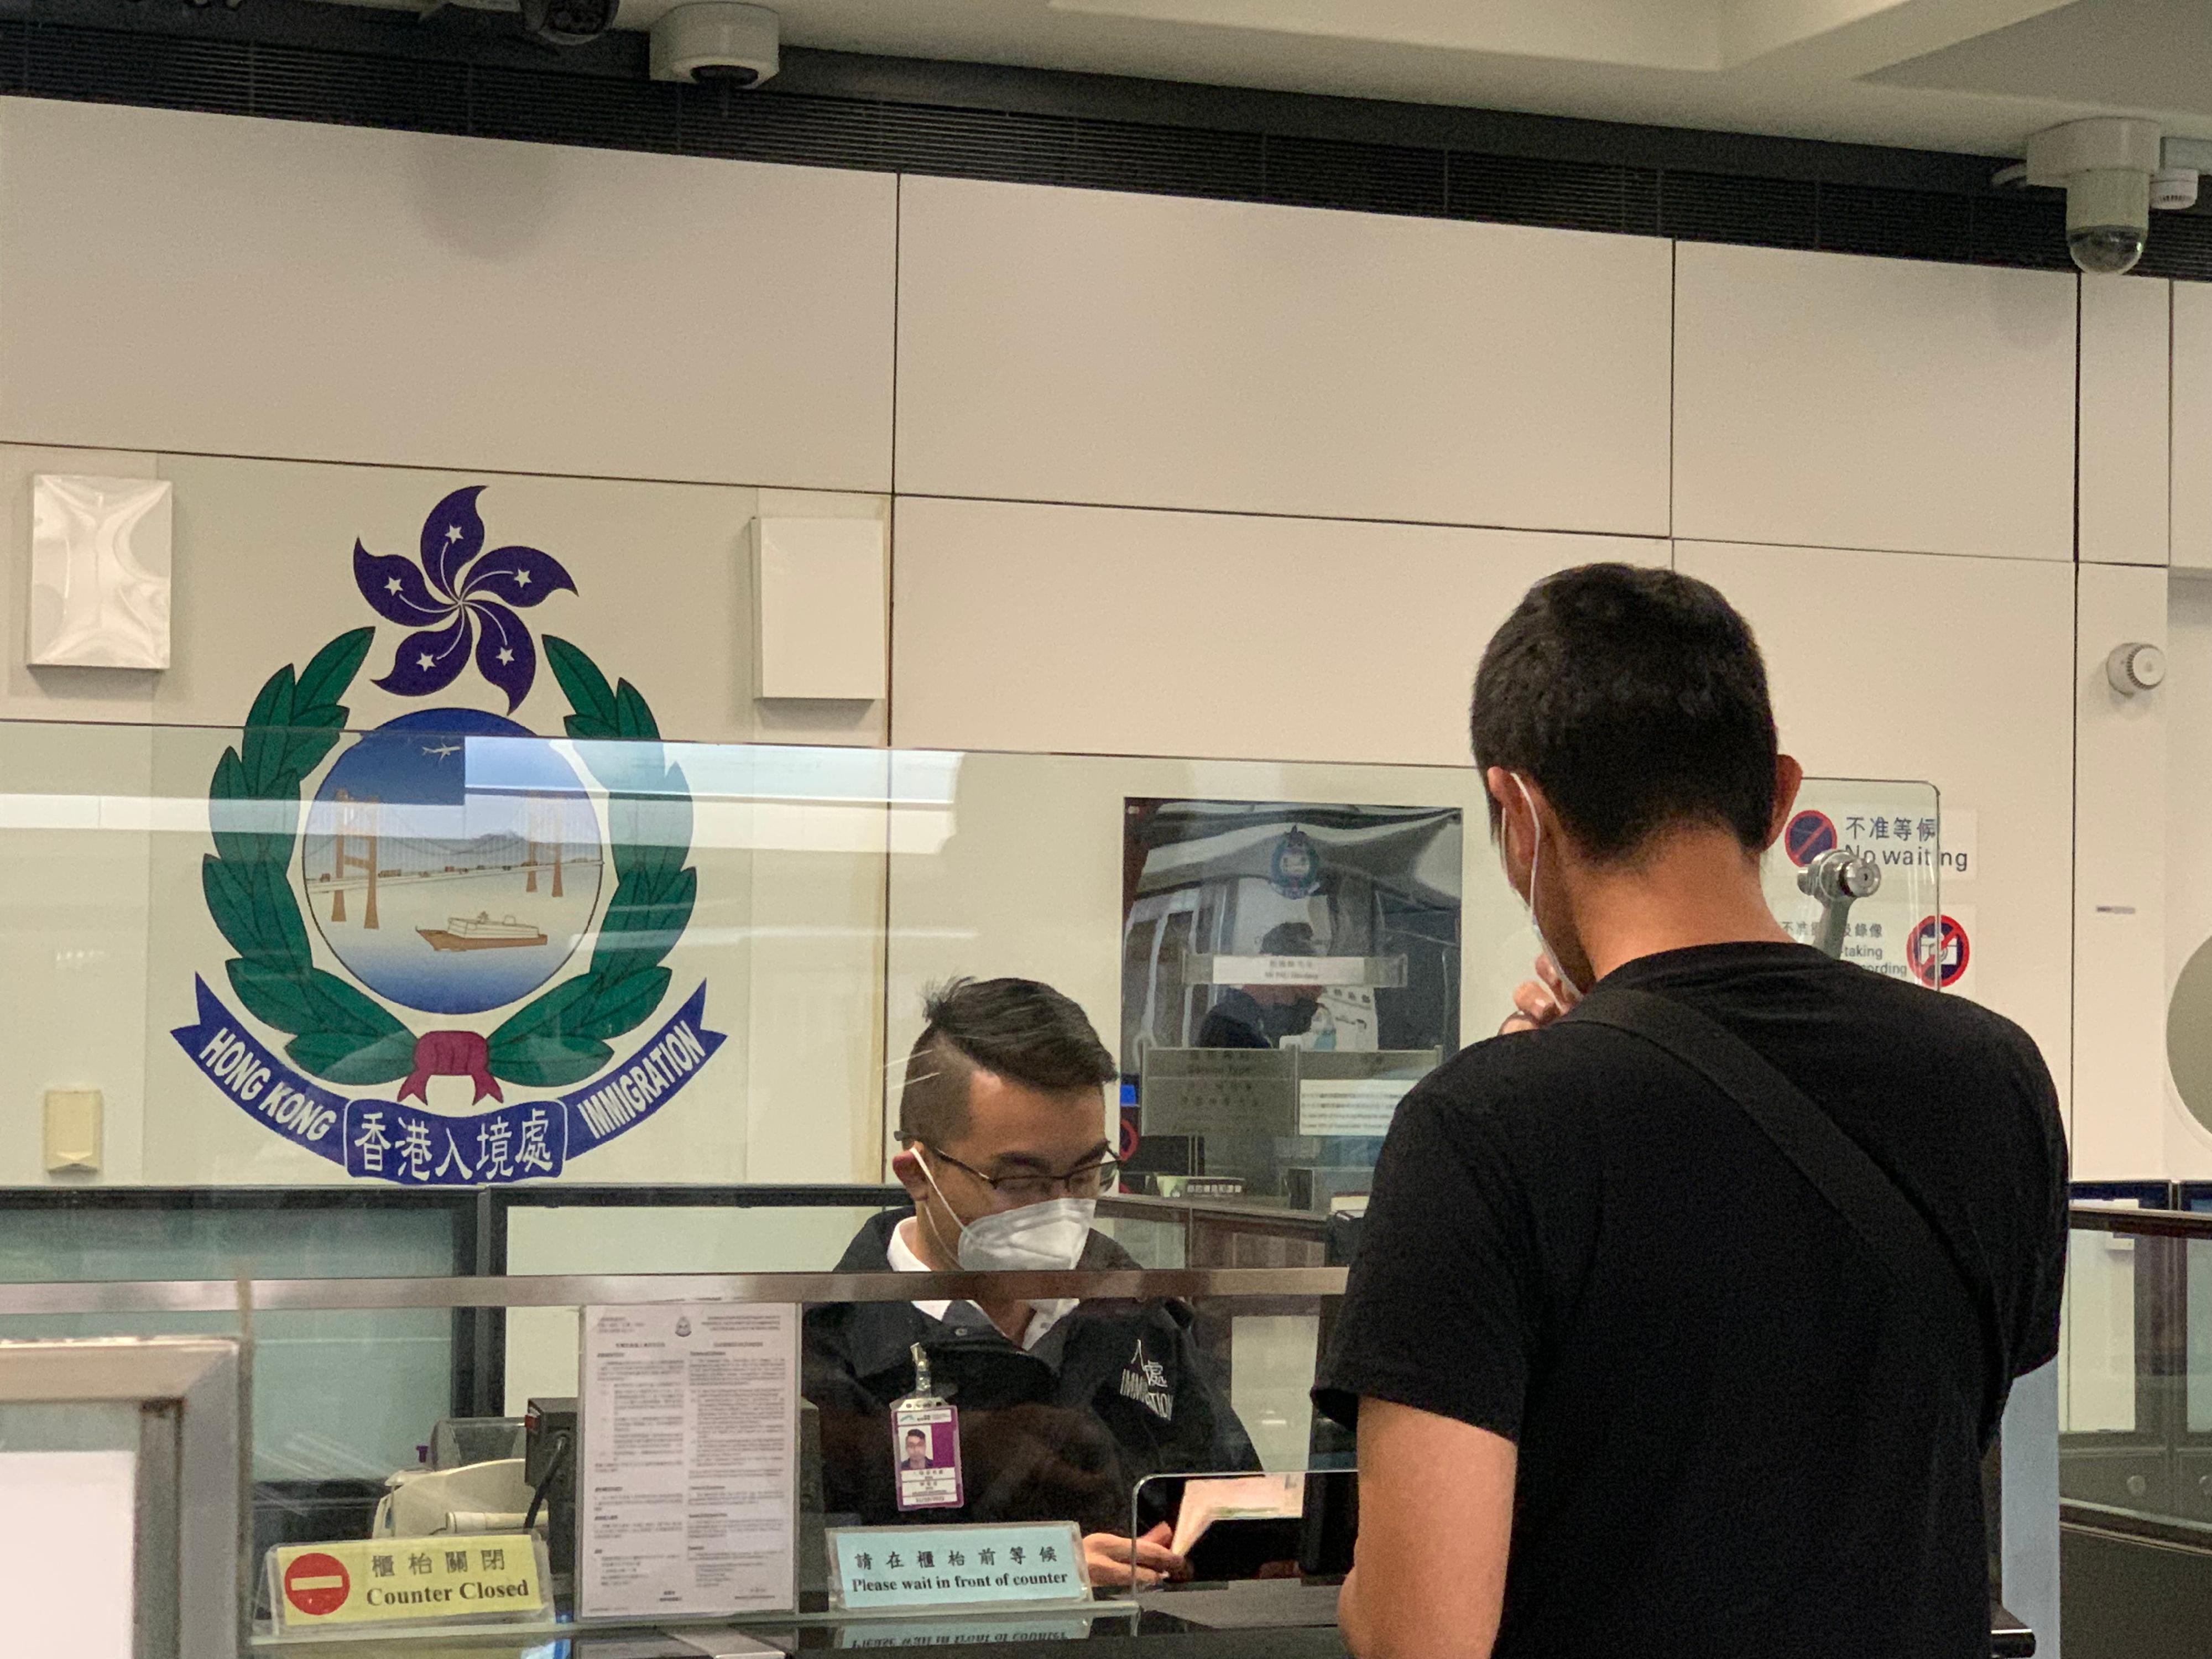 Three assistance seekers safely arrived at Hong Kong International Airport today (August 25). Photo shows Immigration staff assisting a concerned assistance seeker to go through immigration clearance at a designated counter.